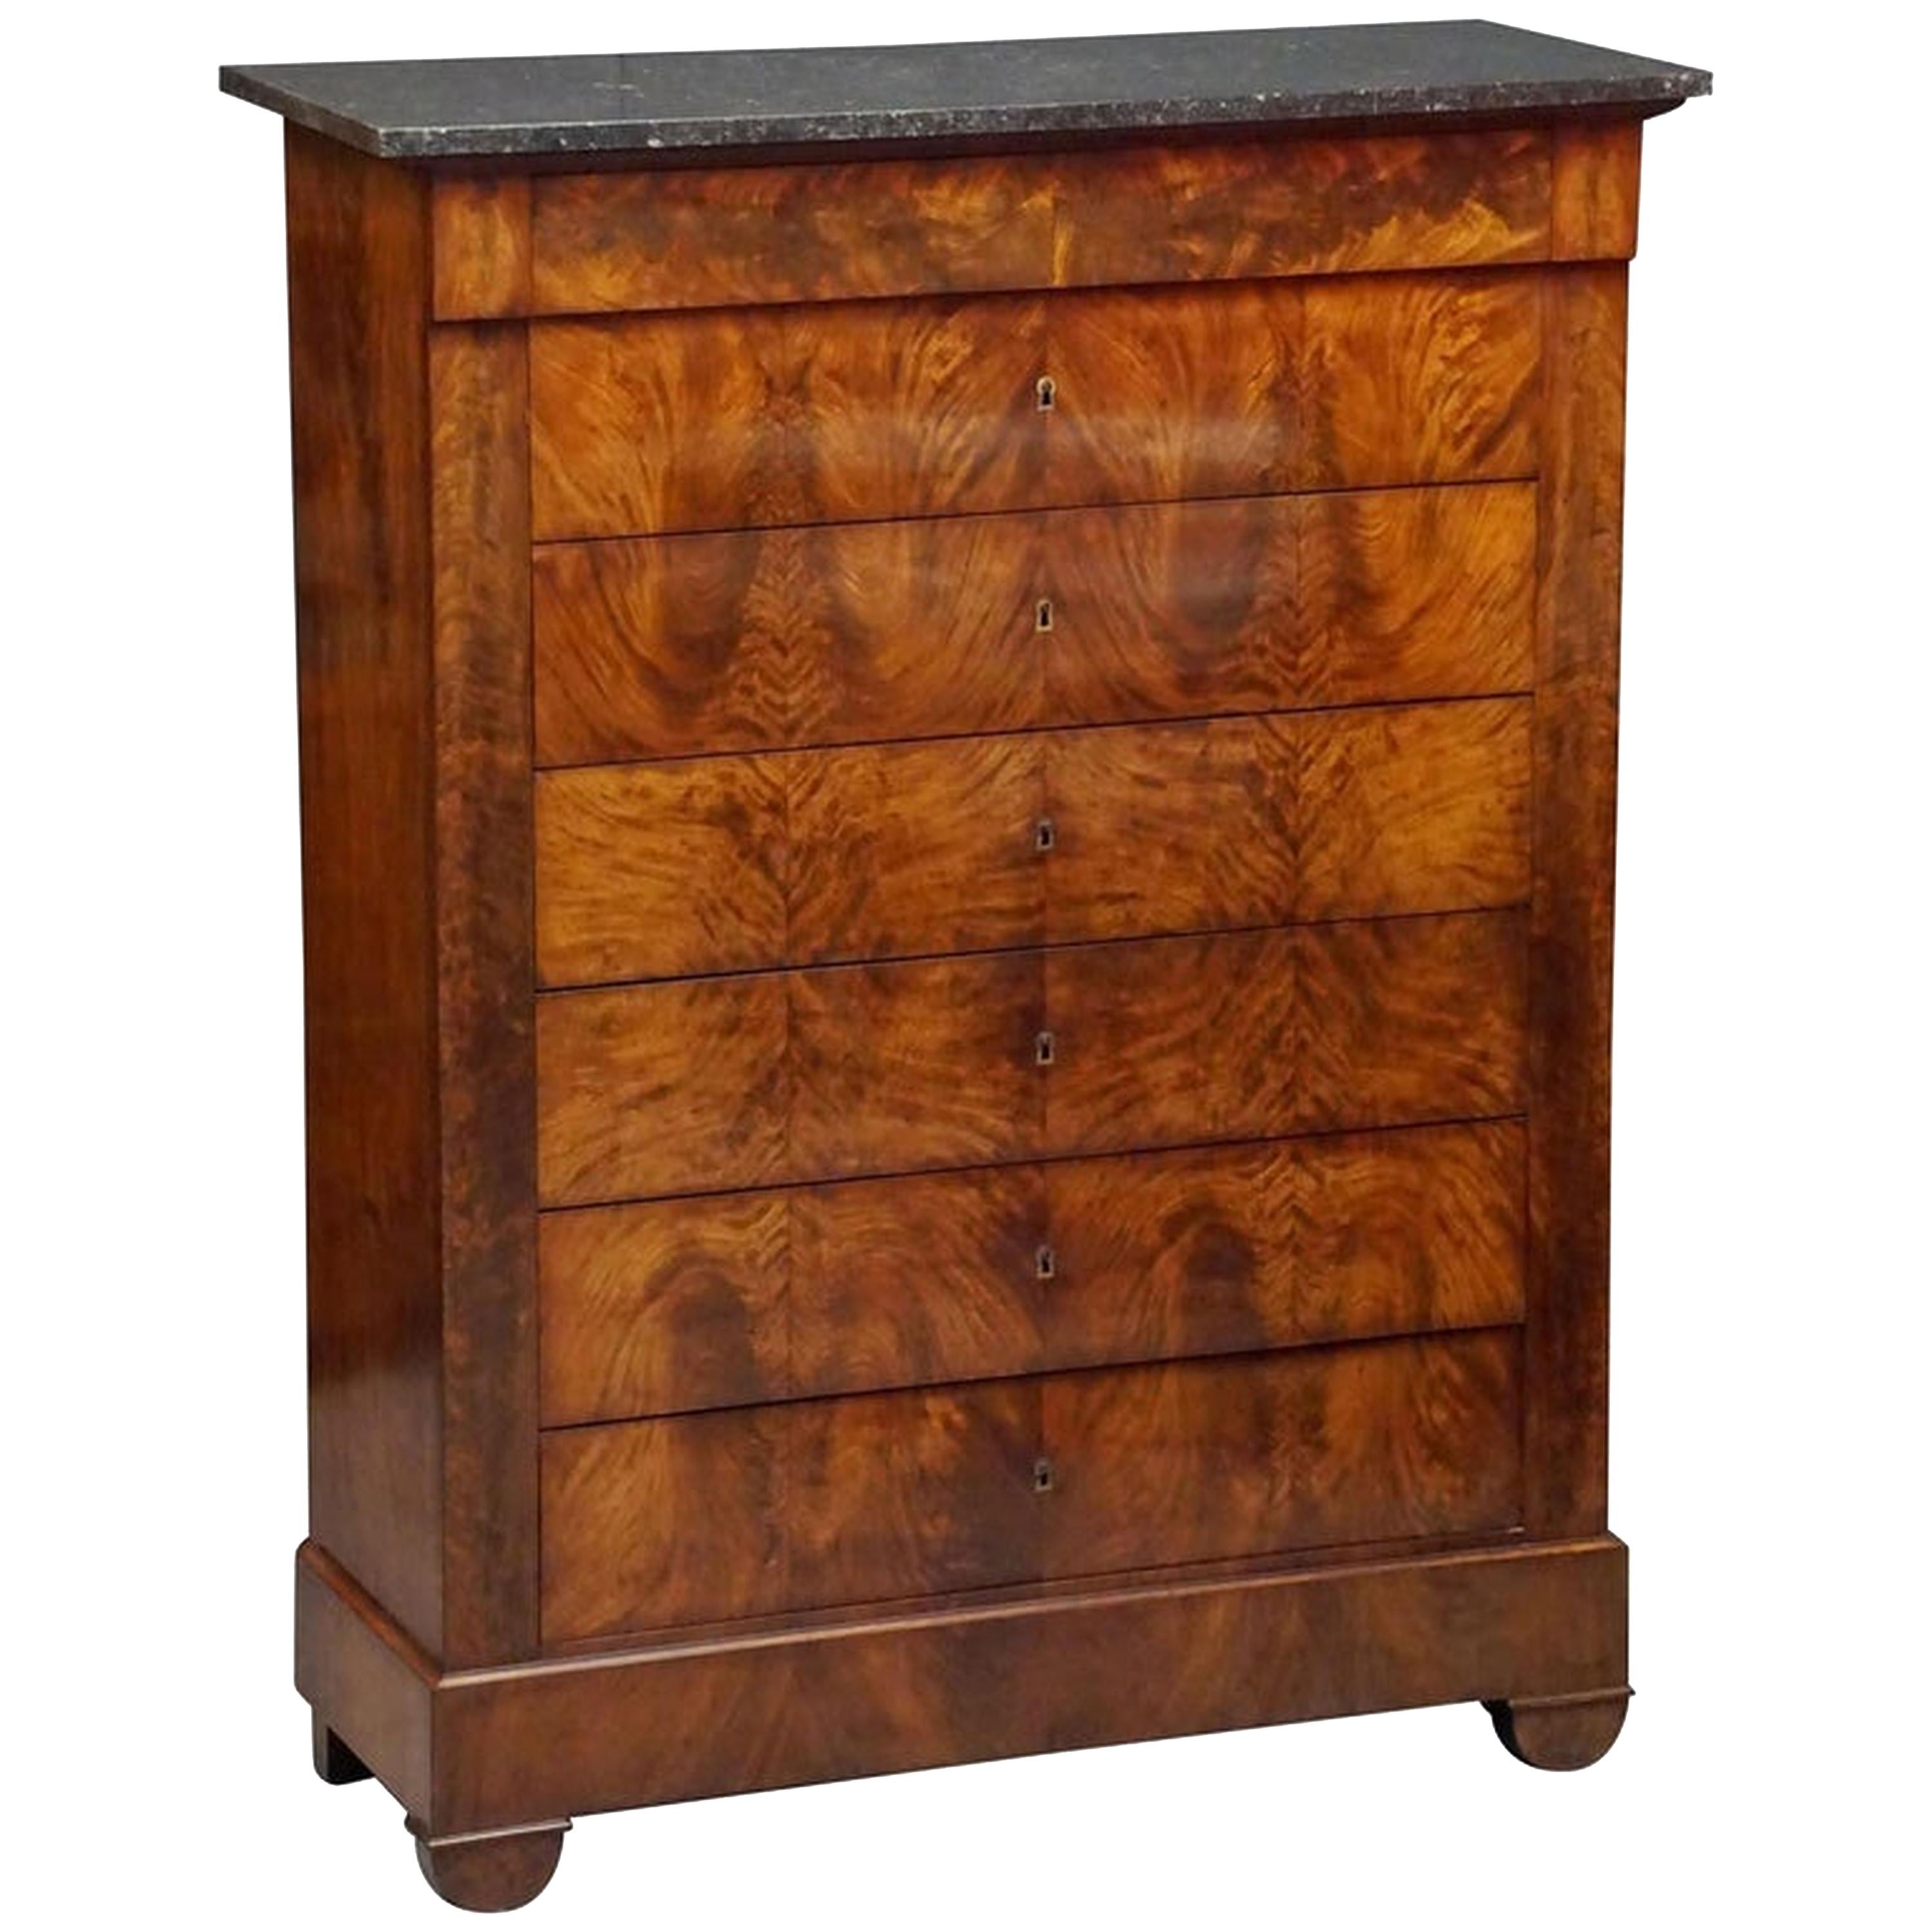 French Semainier or Tall Chest of Mahogany with Marble Top